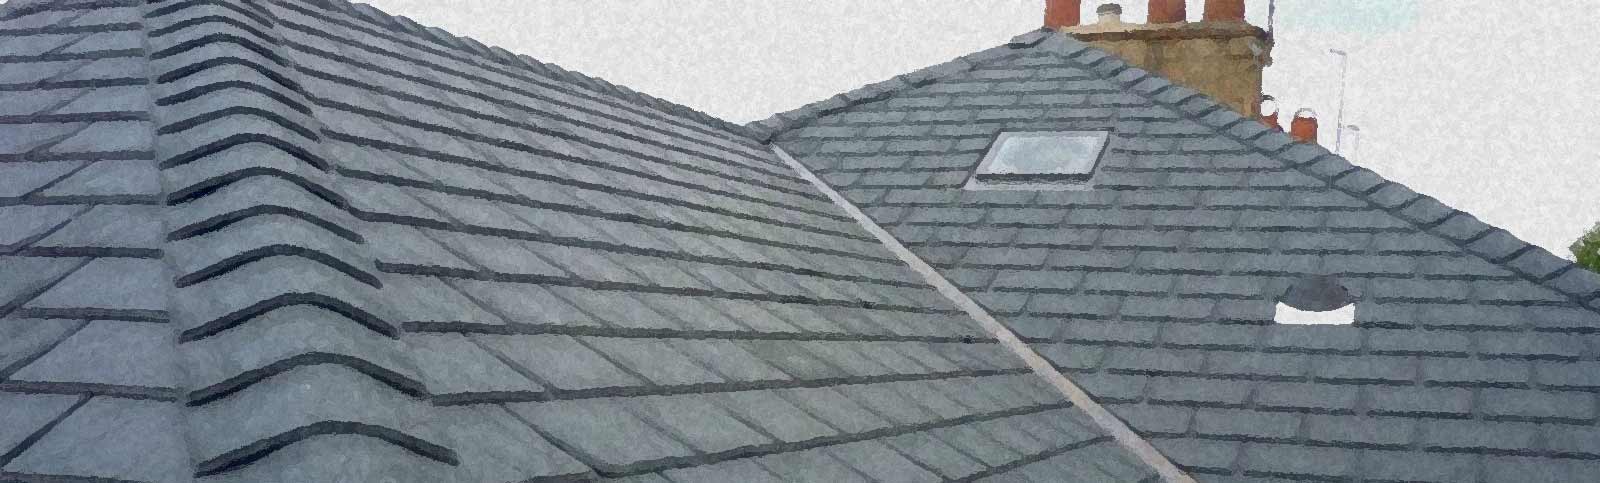 What to Look For in a Roofing Company